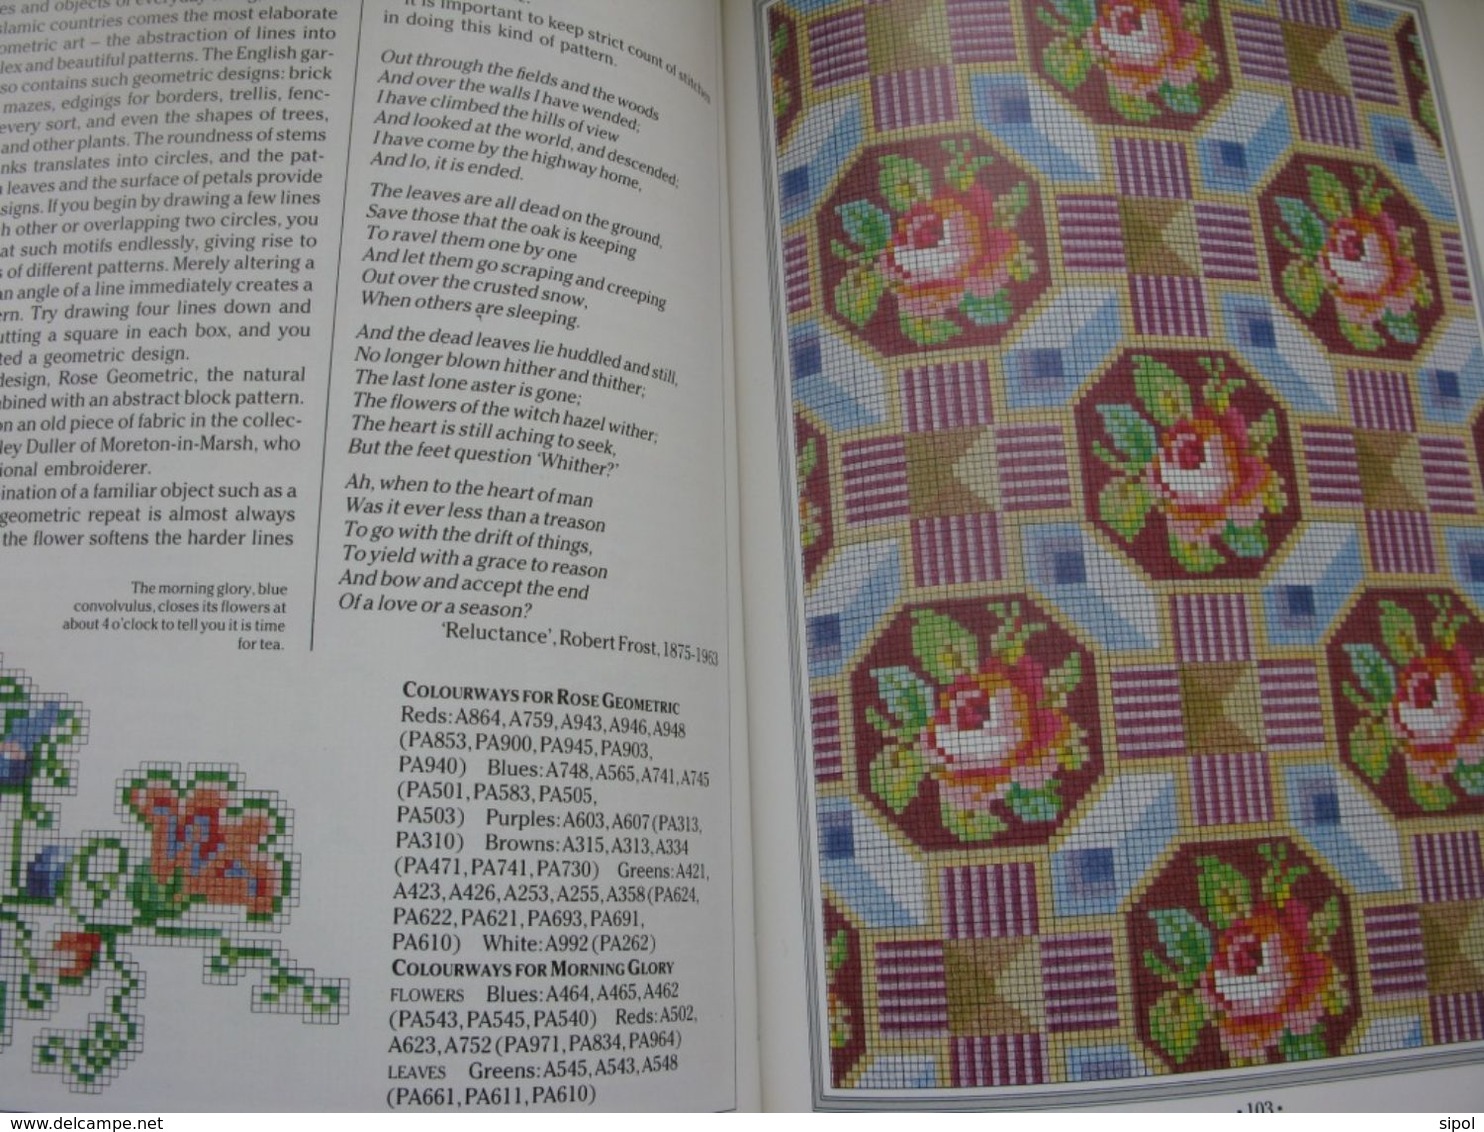 Loisirs  Créatifs  Points De Croix  English Garden Embroidery ( Stafford Whiteaker) 144 Pages - Bricolage